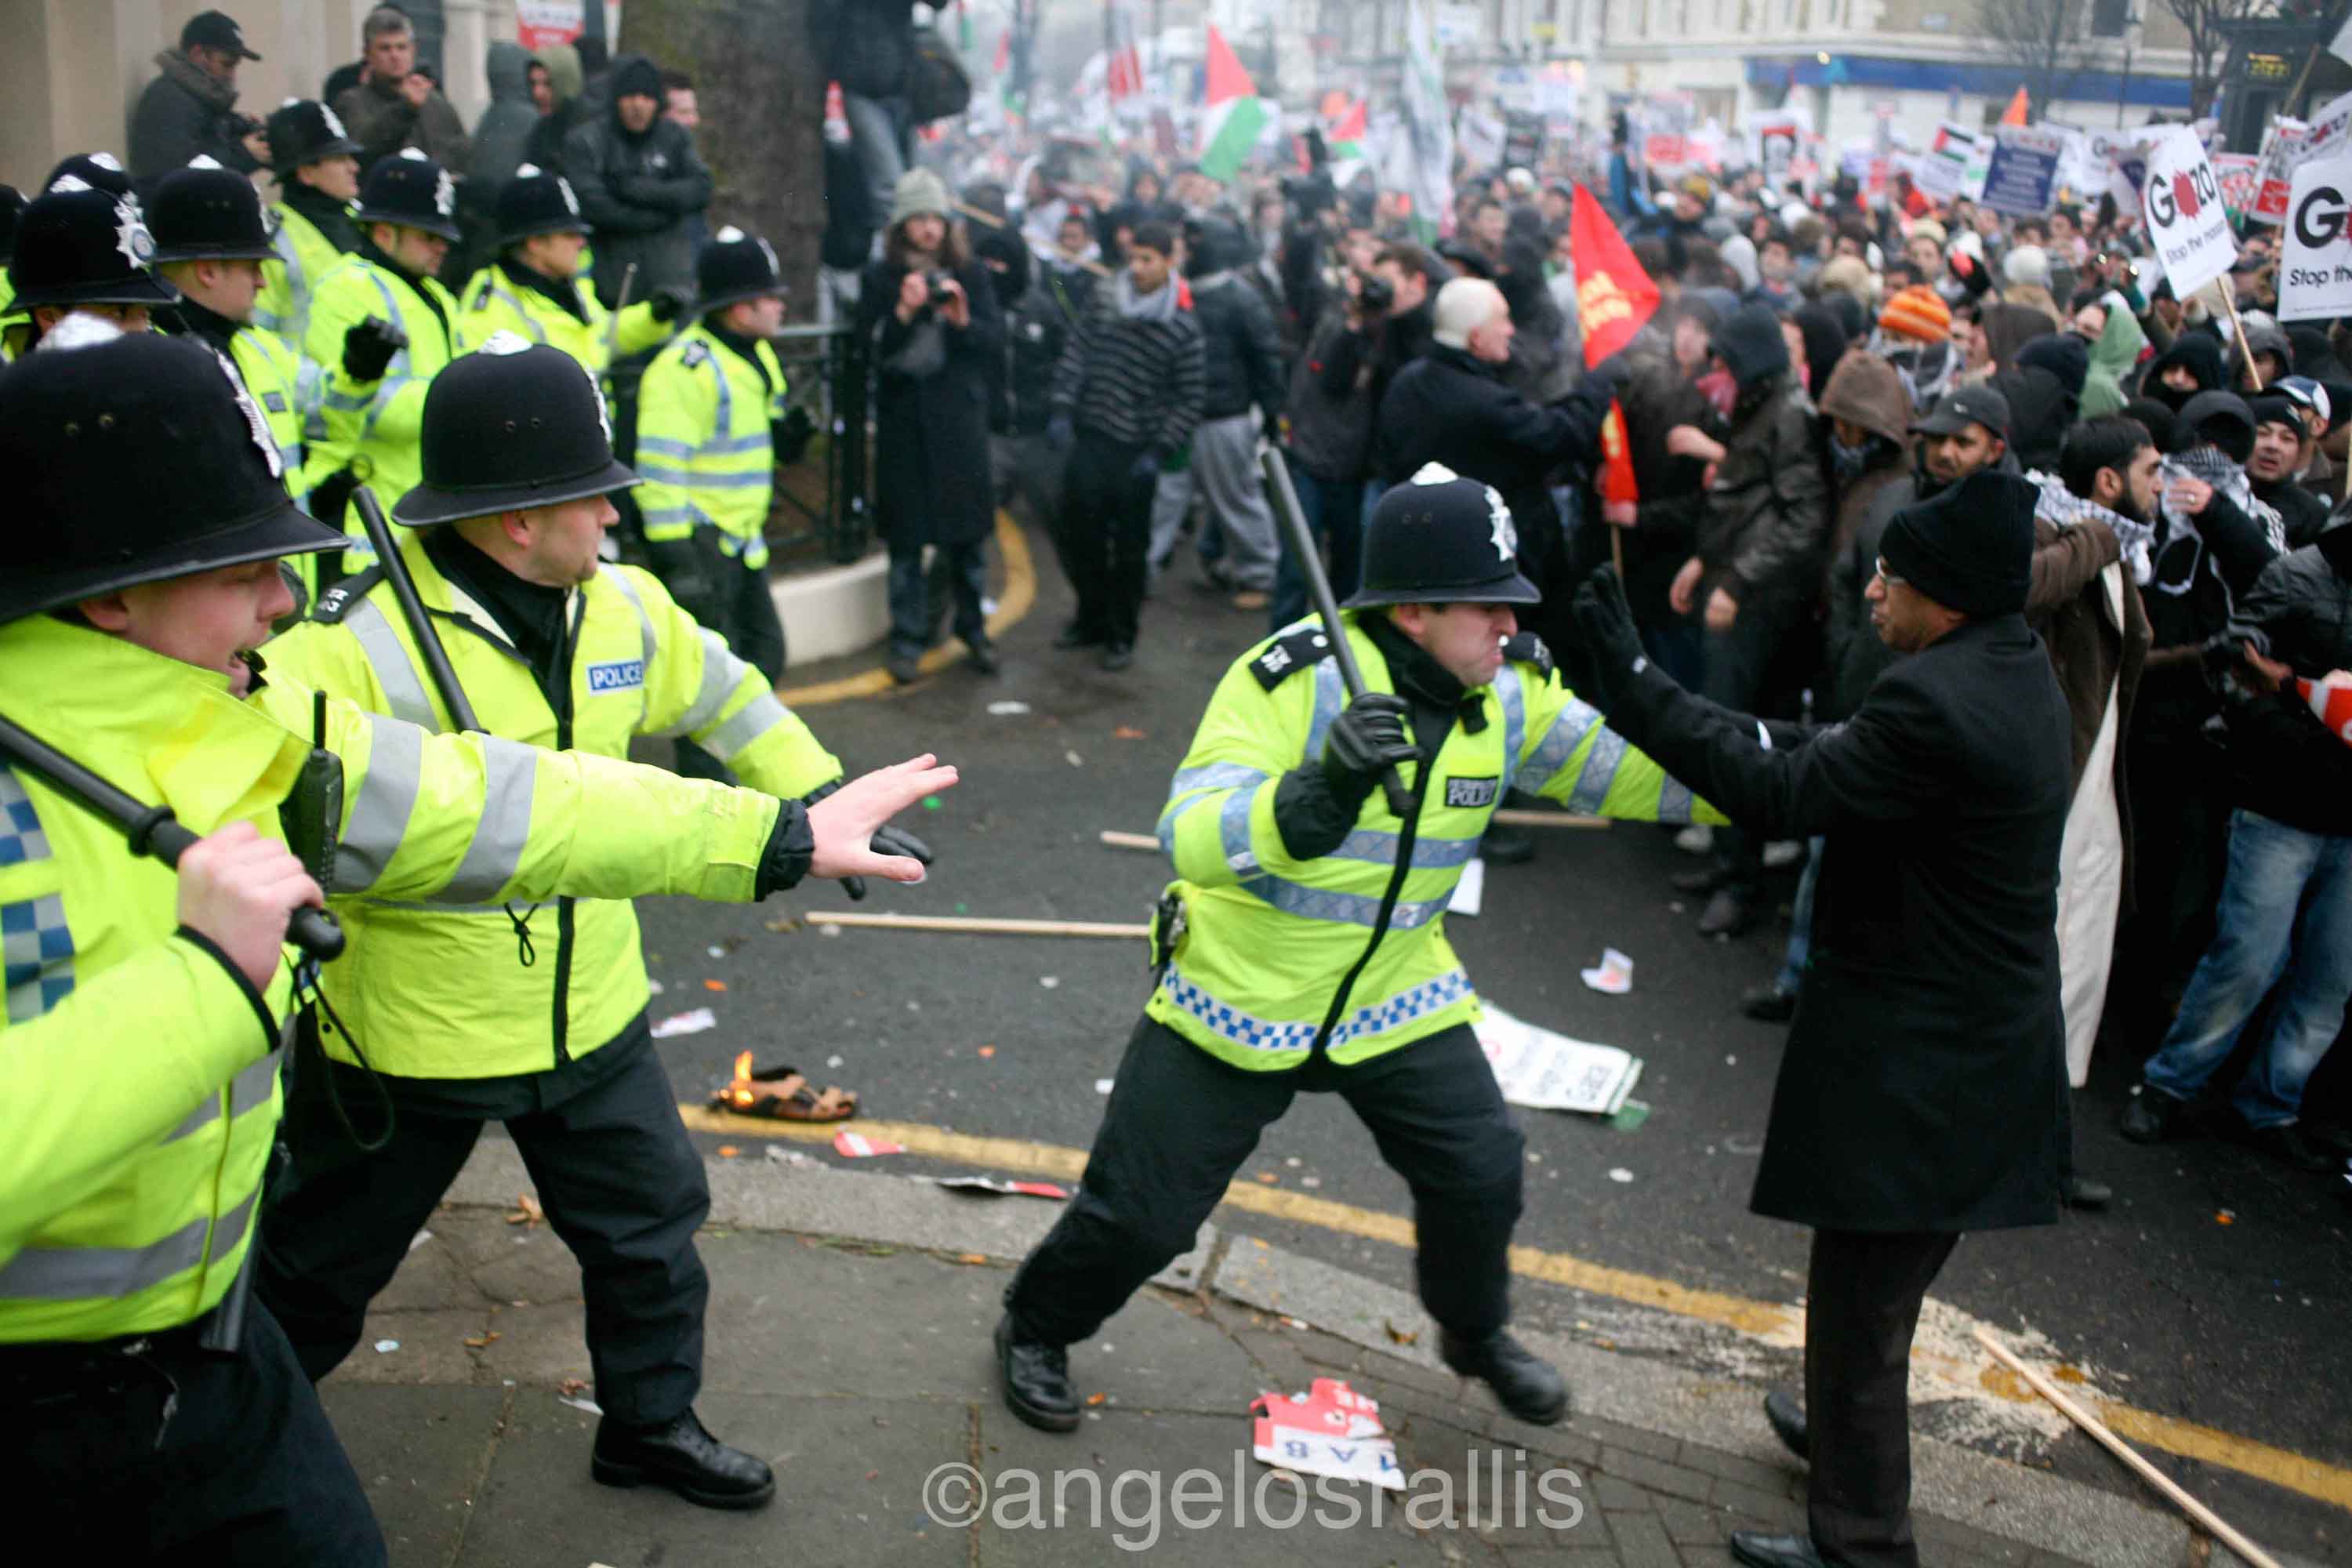 Elder protester being attacked by erratic police officer